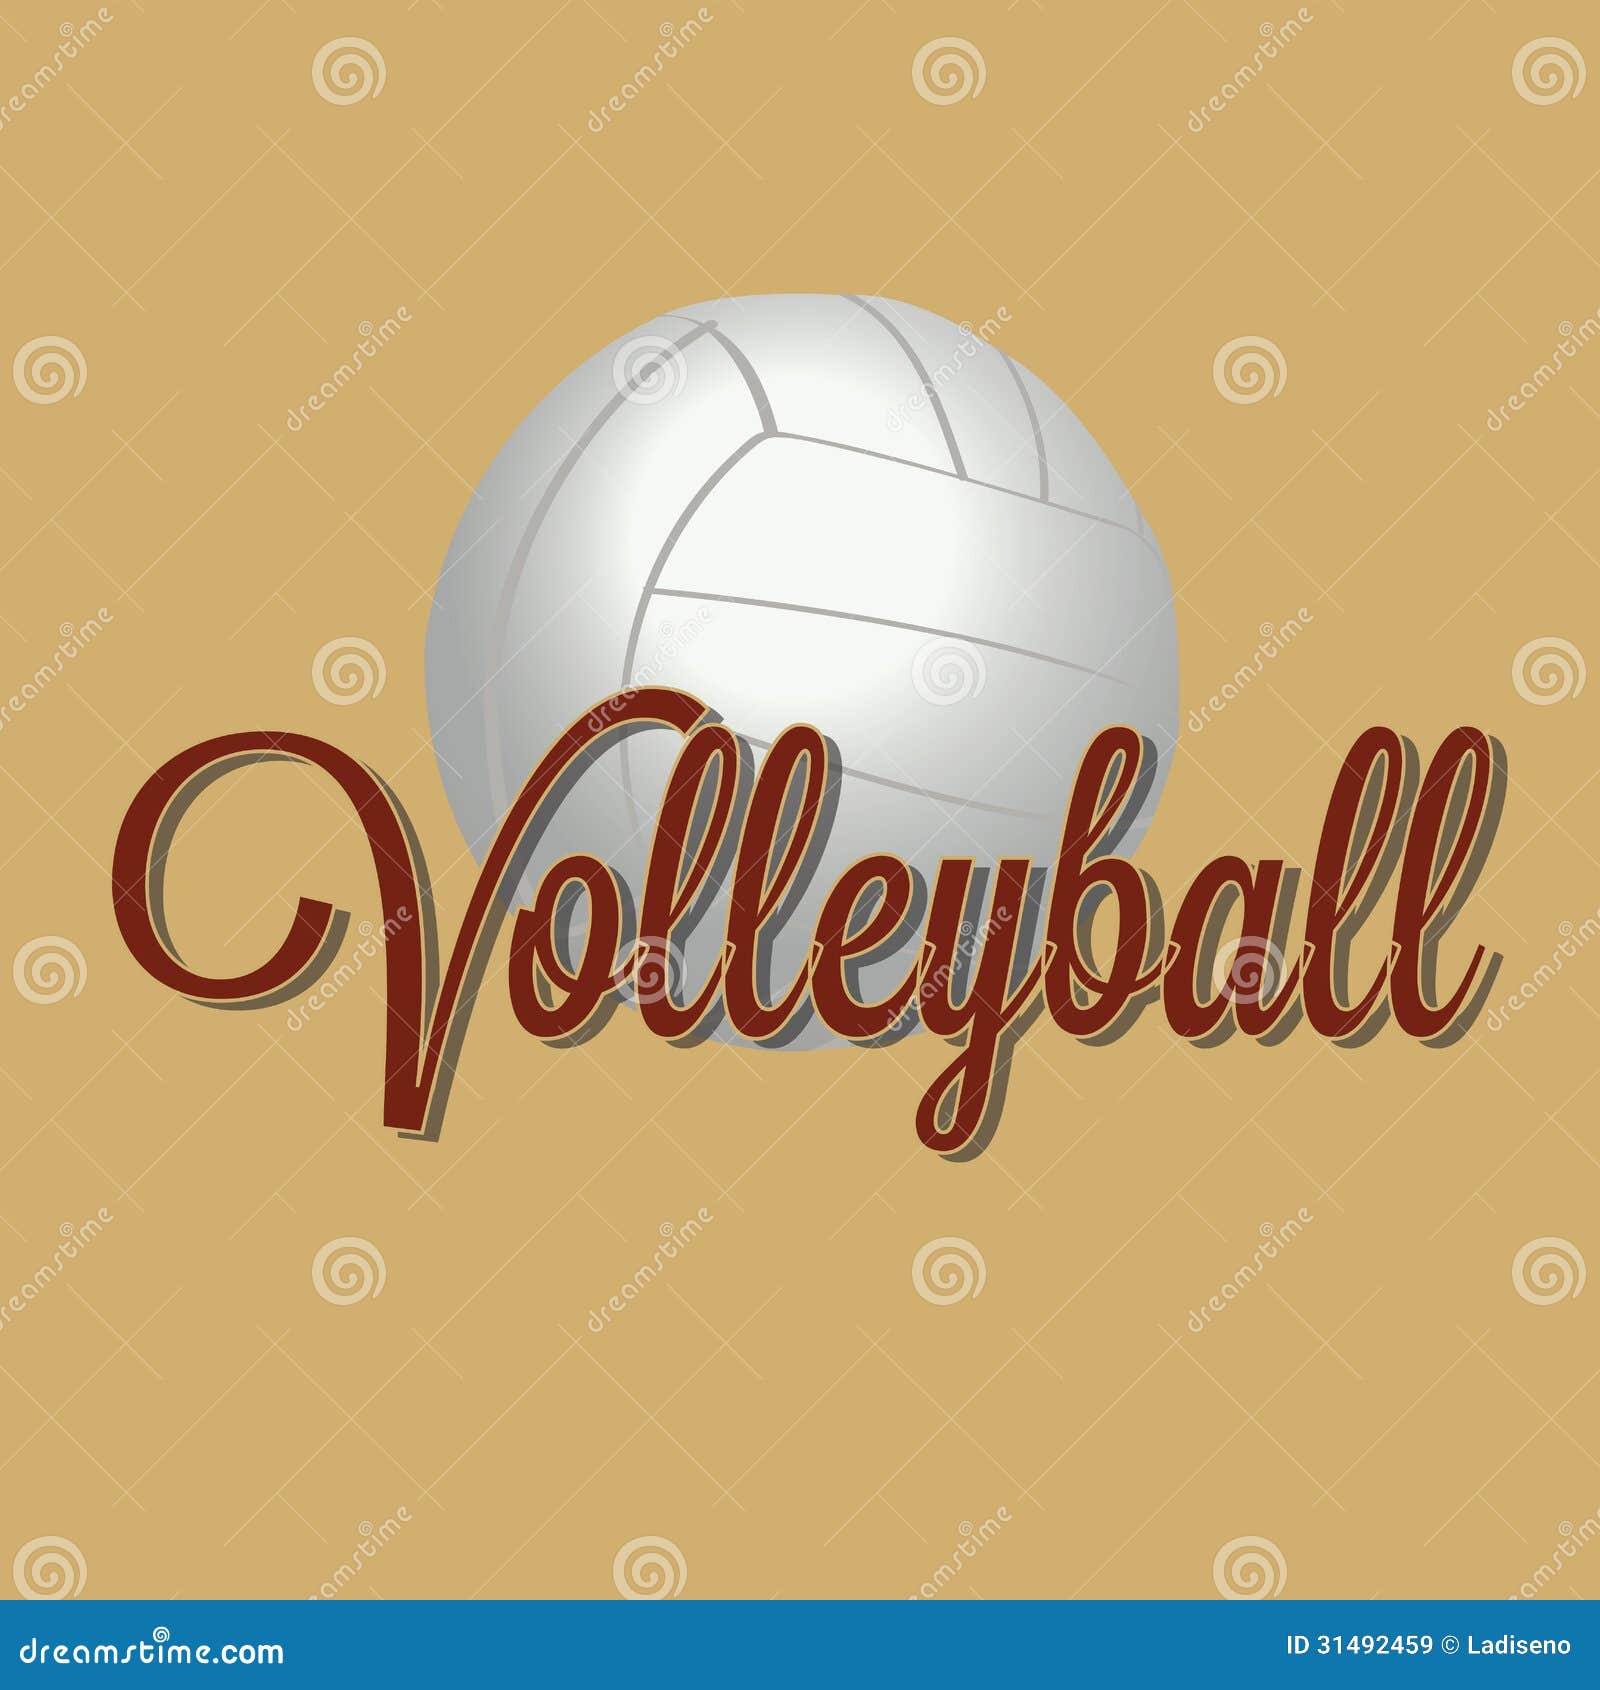 volleyball clipart with no background - photo #43